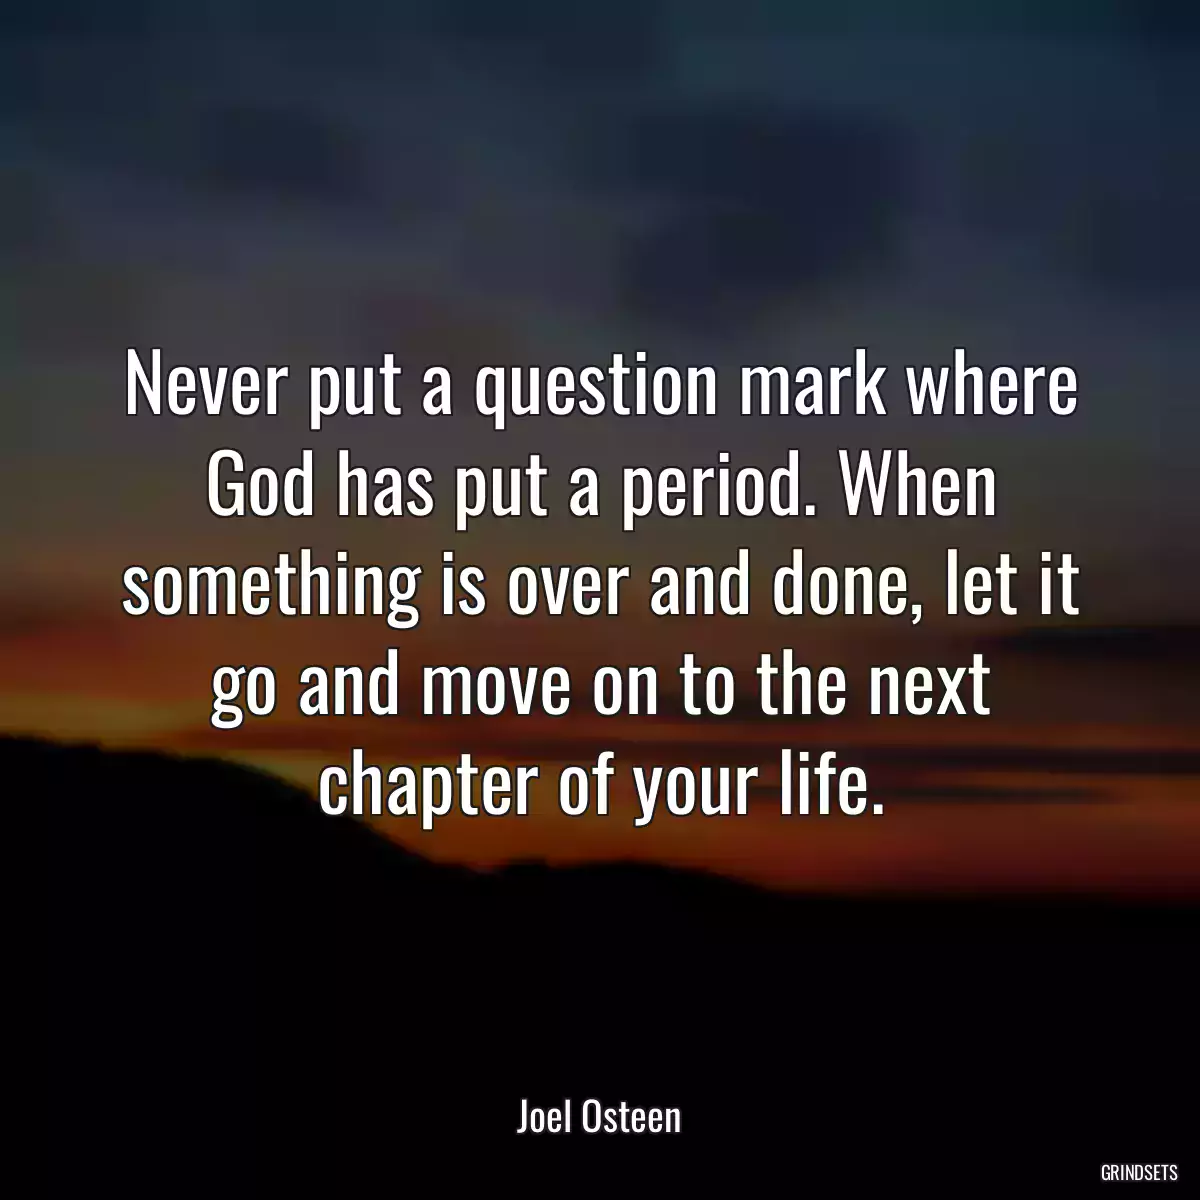 Never put a question mark where God has put a period. When something is over and done, let it go and move on to the next chapter of your life.